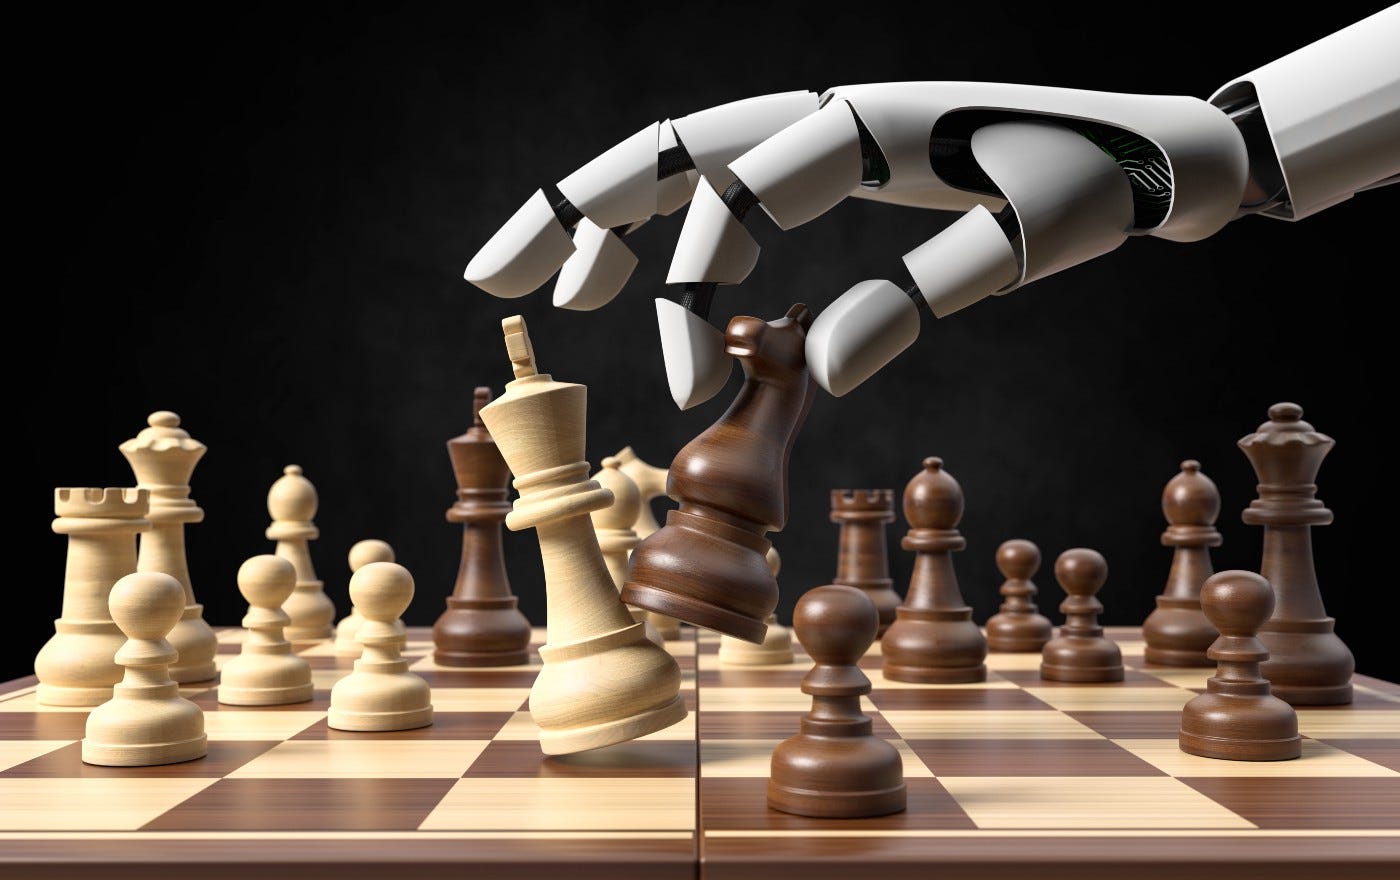 Why Artificial Intelligence Like AlphaZero Has Trouble With the